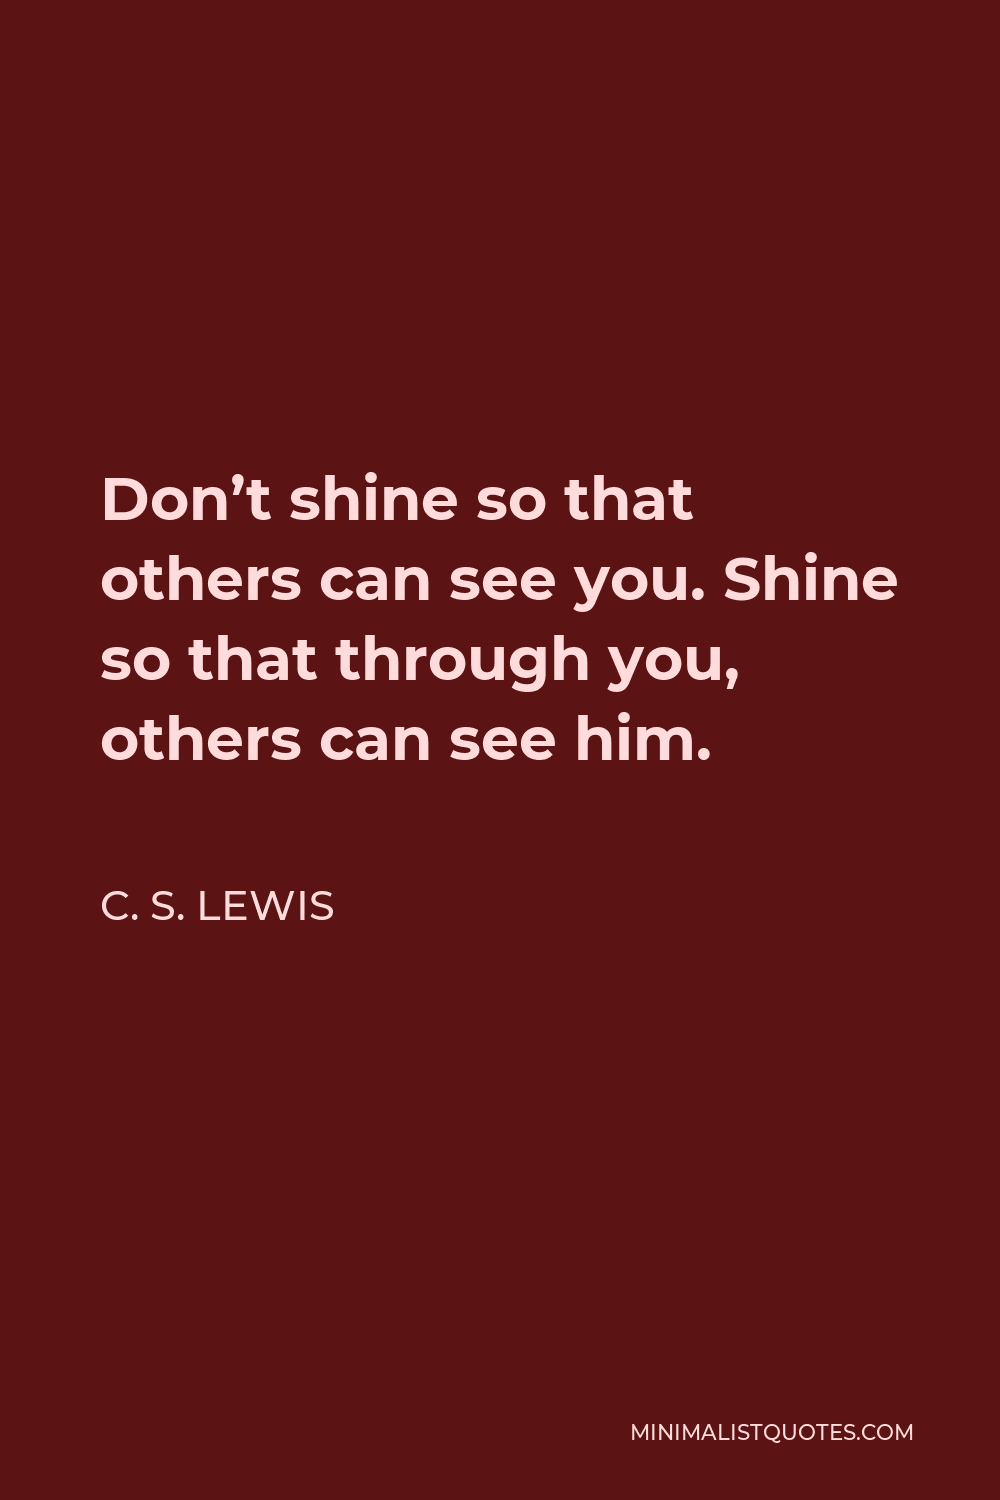 C. S. Lewis Quote - Don’t shine so that others can see you. Shine so that through you, others can see him.